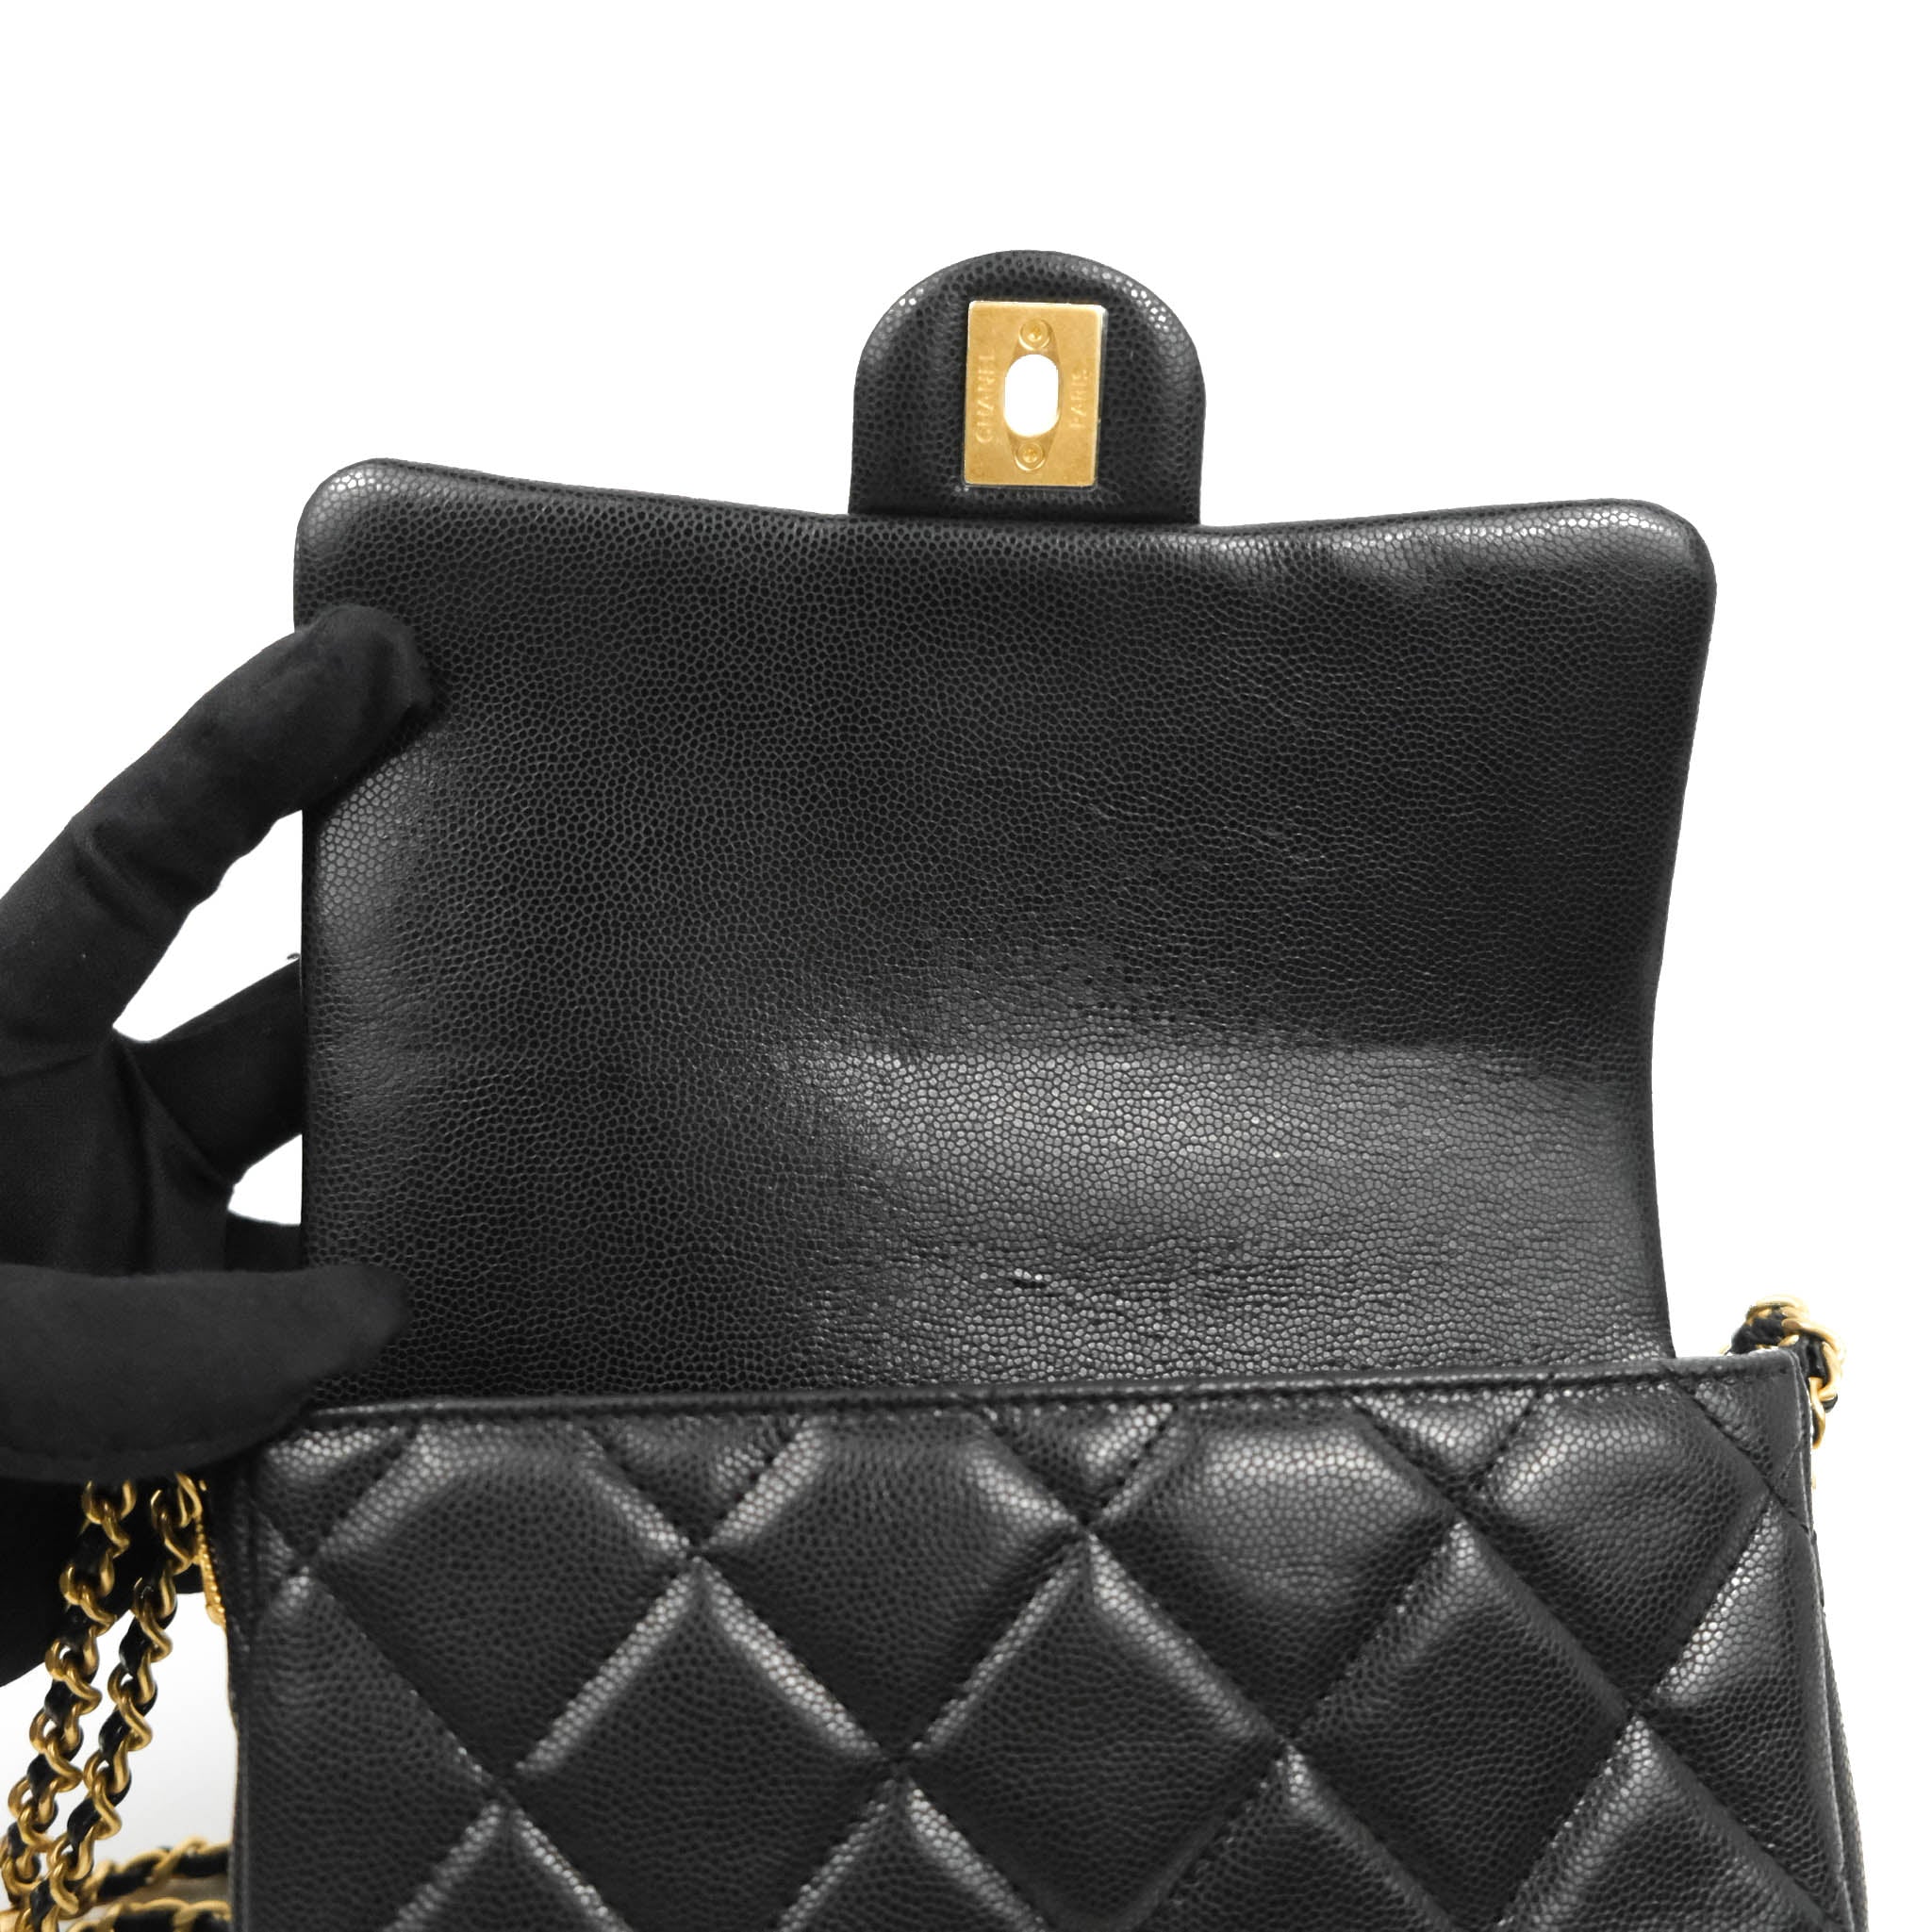 Chanel Small Flap with Coin Charm Black Caviar Aged Gold Hardware 22A – Coco  Approved Studio